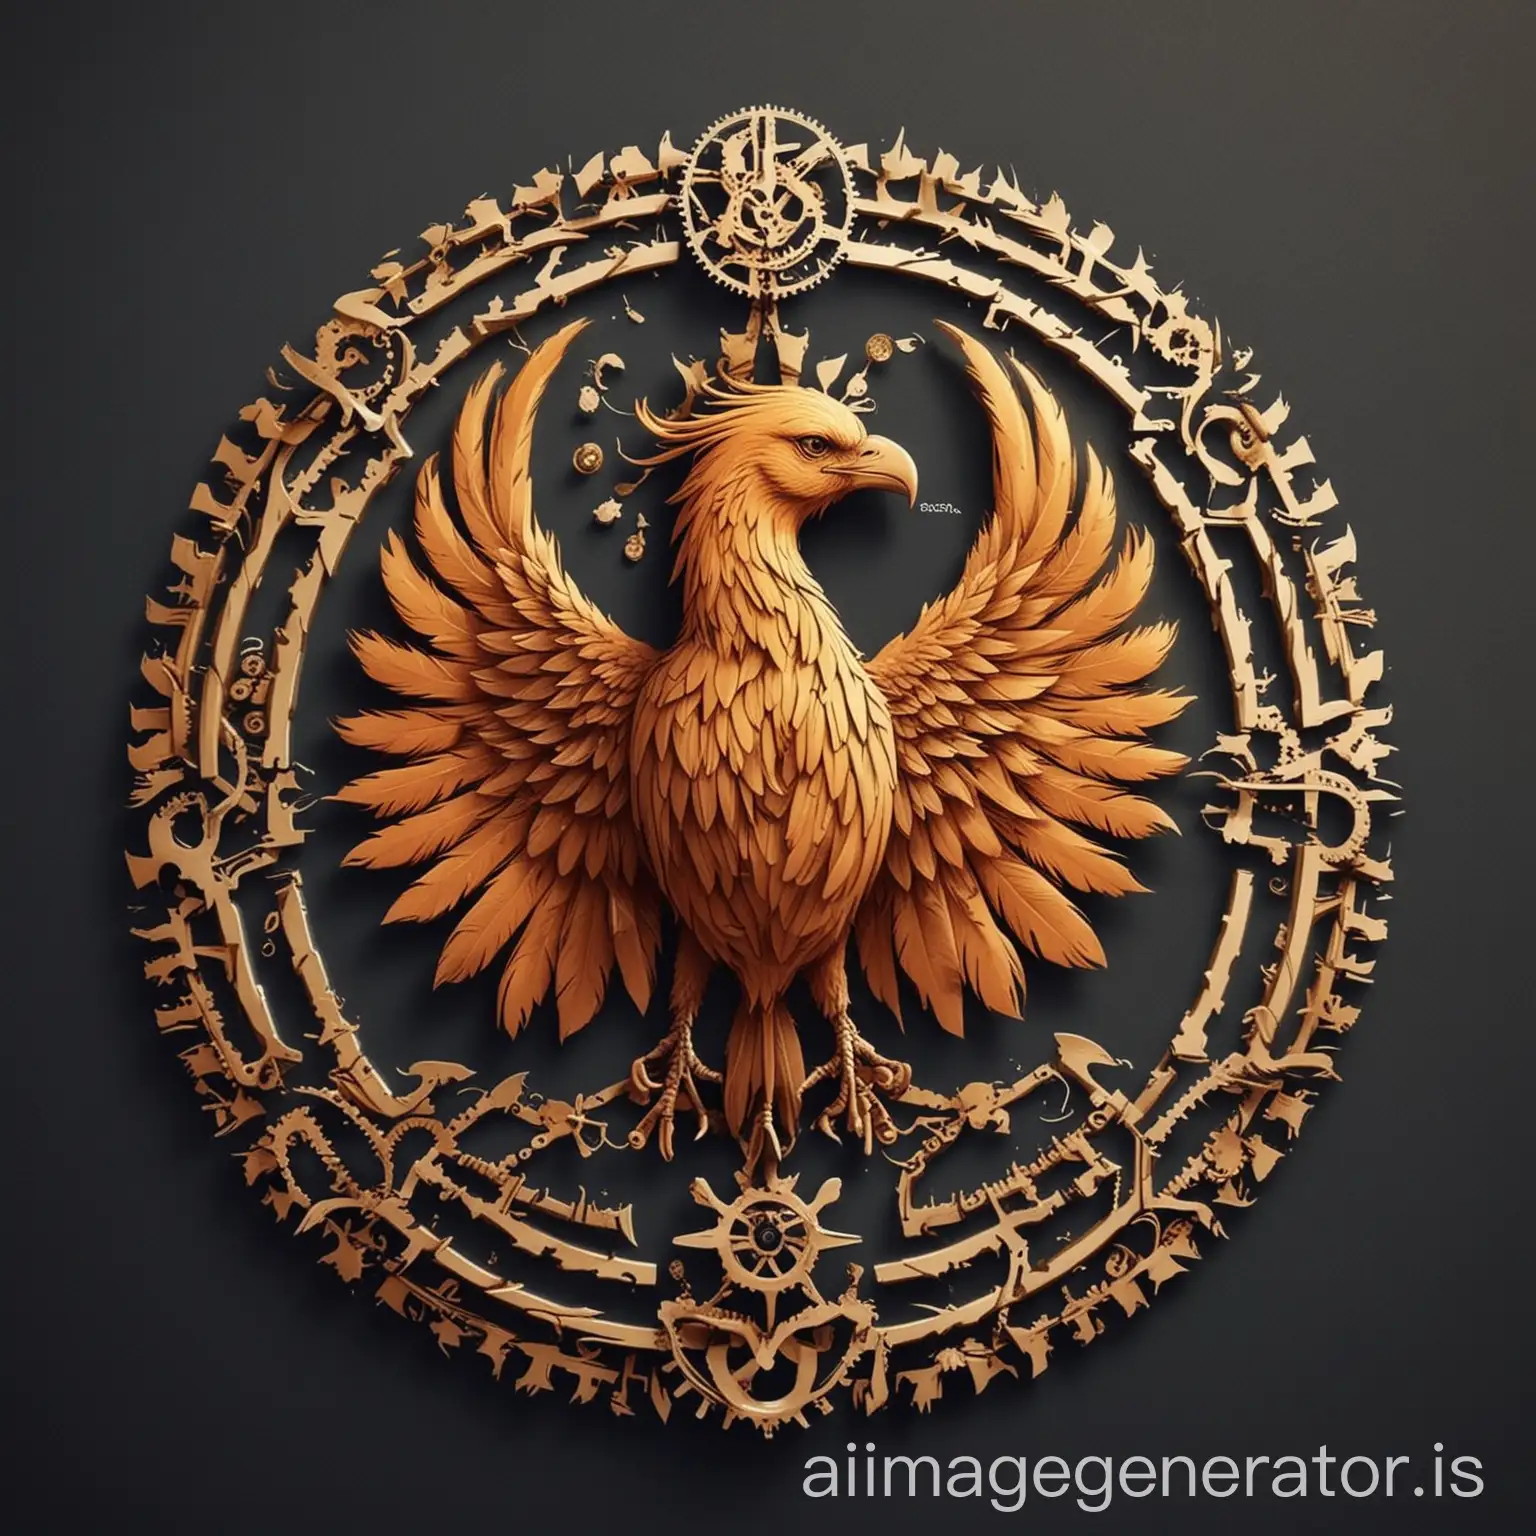 I want a logo for technical and vocational university that show Islamic, scientific and technical symbols. I want this logo circular and use Phoenix feathers without the use of a bird's head and use gears around of logo that all of thing put in this gear meaning of the connection between industry and science